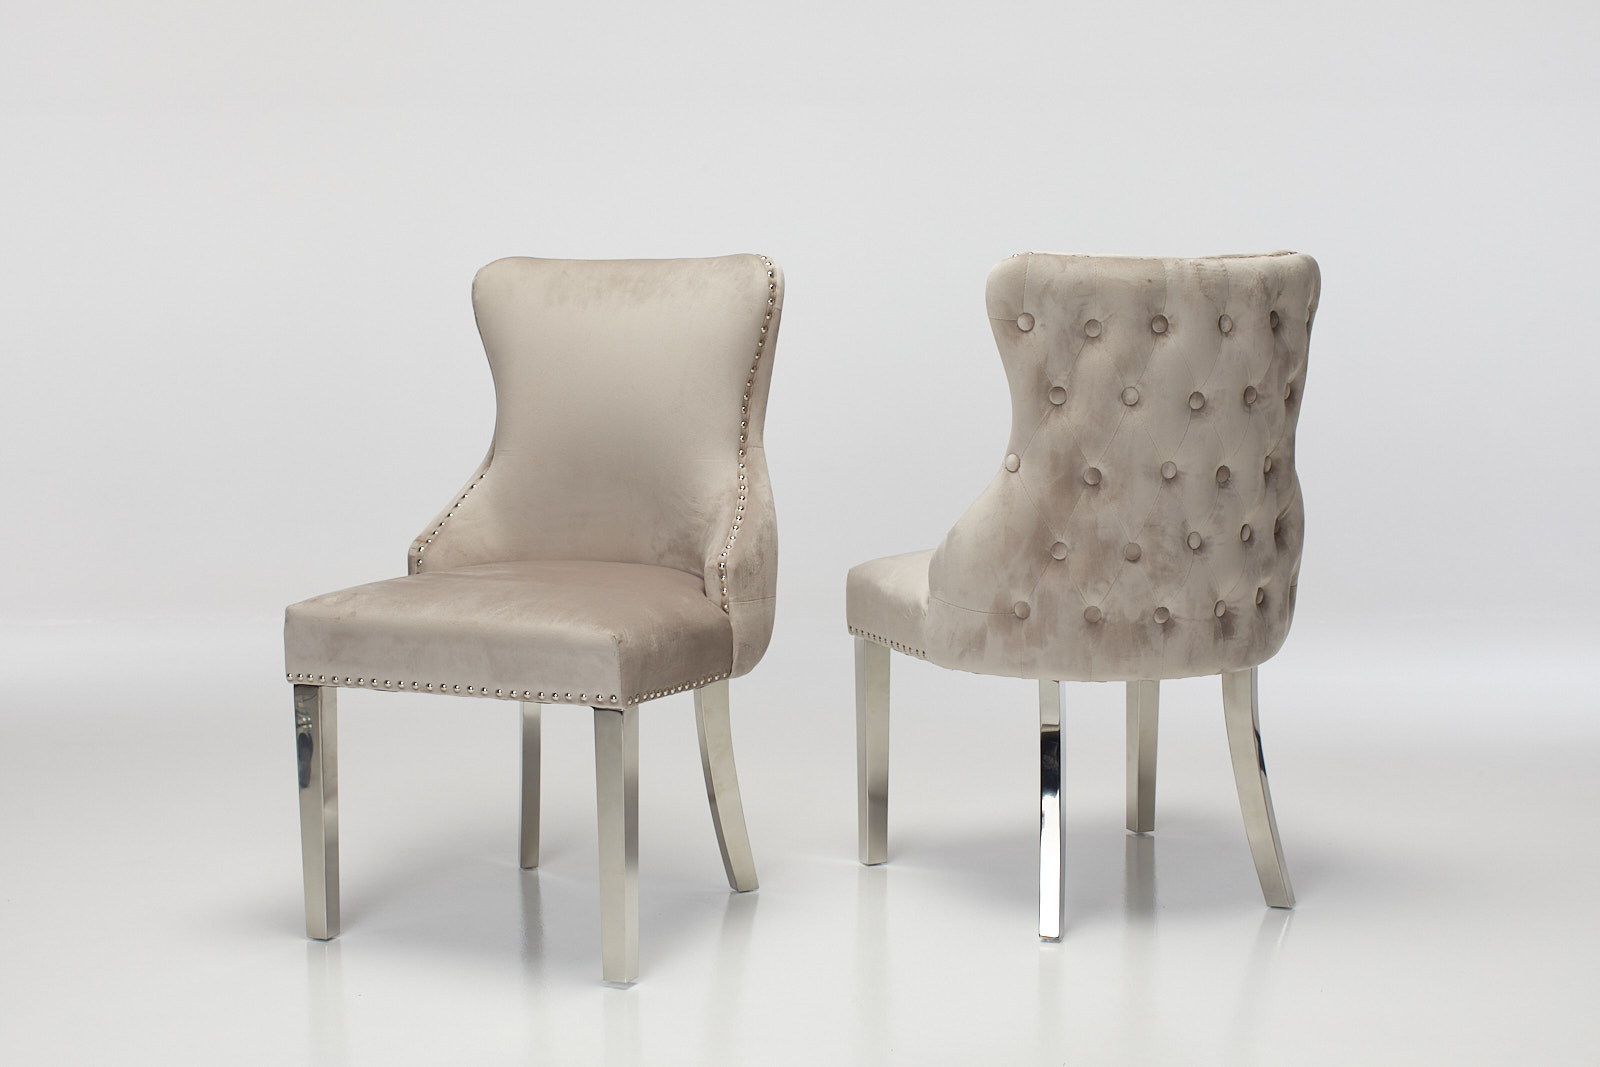 Tiffany Upholstered Dining Chairs in Mink Velvet with Stainless Steel Legs